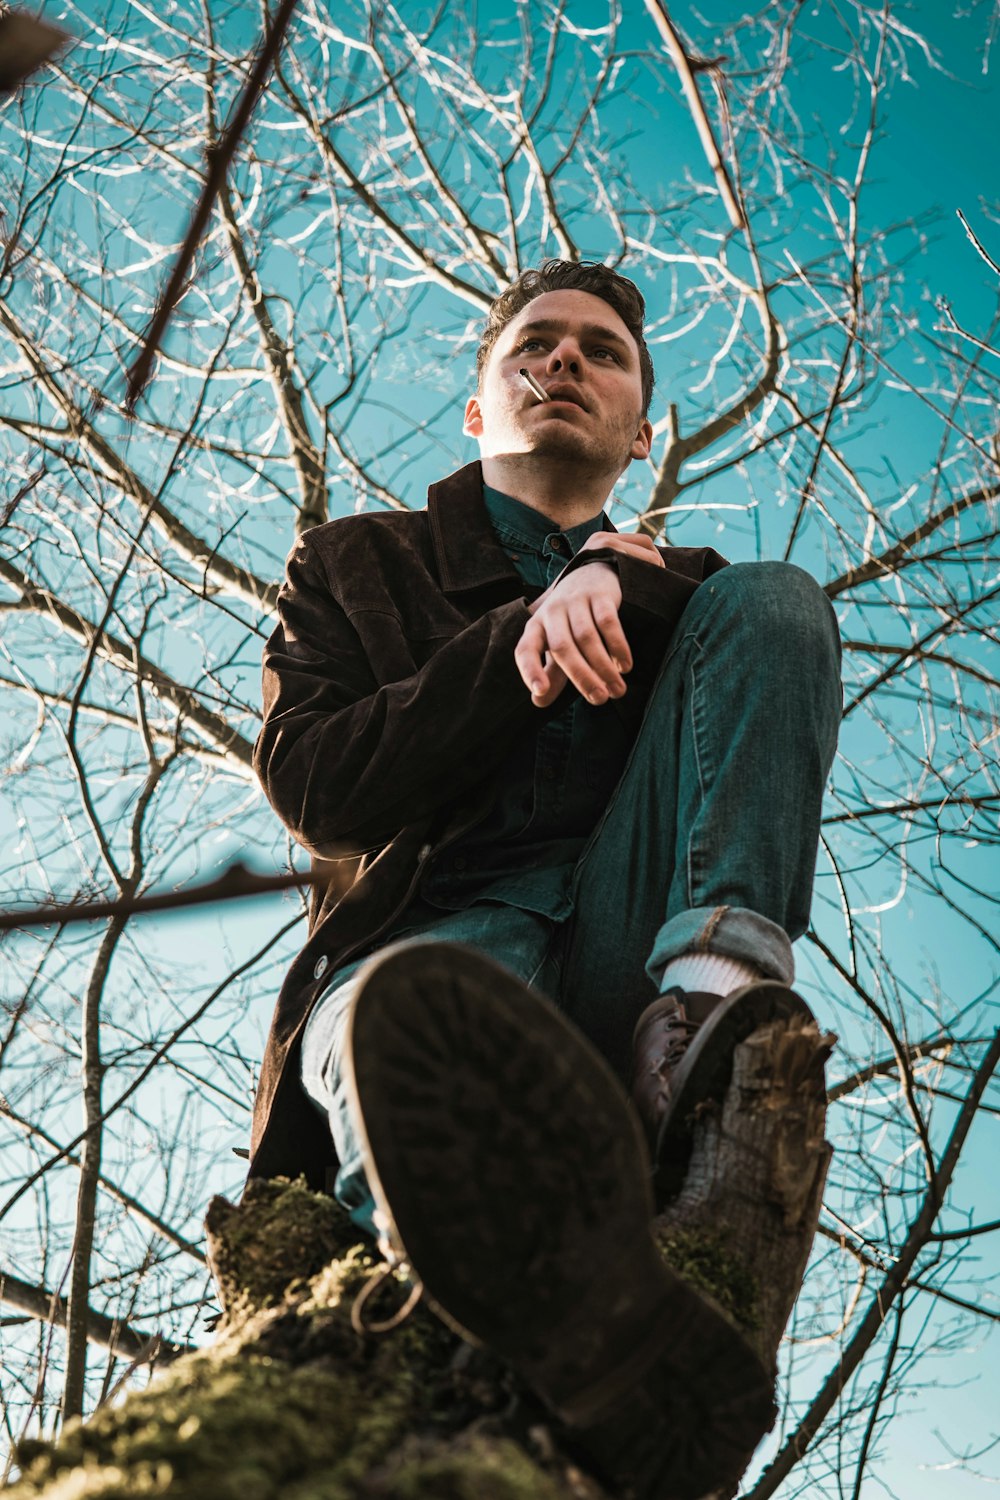 worm's-eye view photography of man sitting on tree